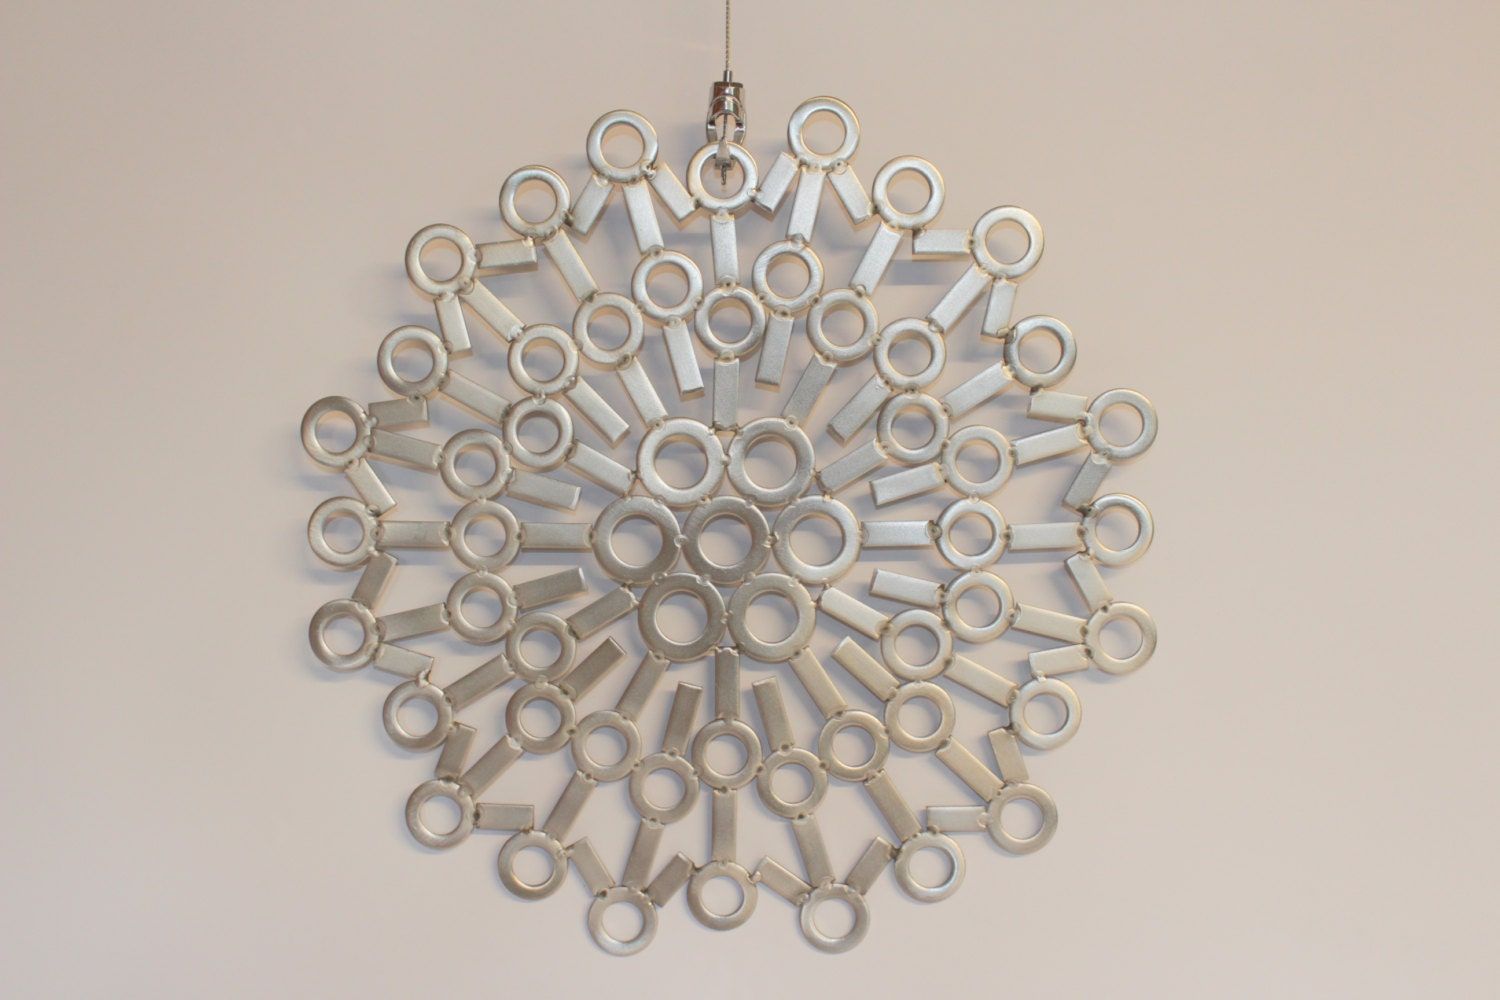 Stainless Steel Metal Wall Art Sculpture / Placemat Regarding Most Current Stainless Steel Metal Wall Sculptures (View 12 of 20)